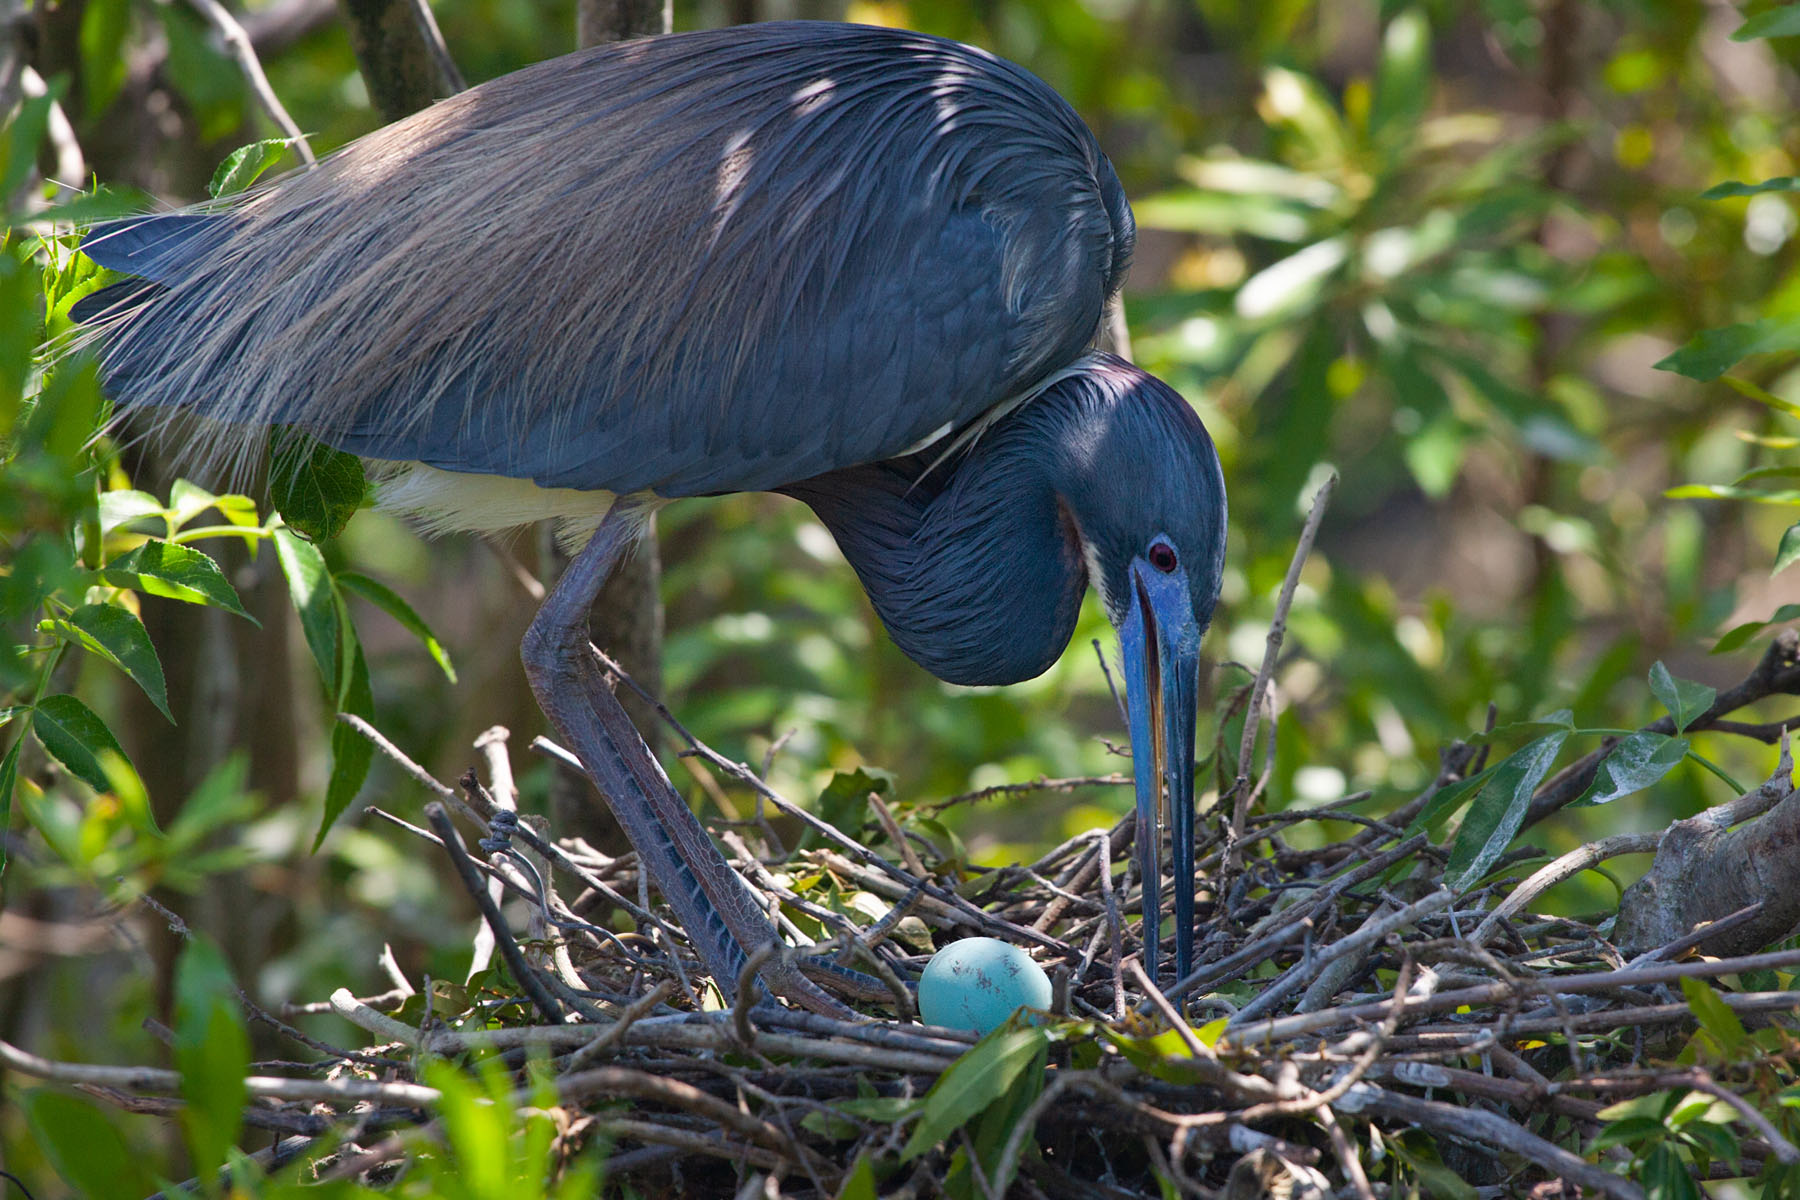 Heron and egg, St. Augustine Alligator Farm, April 2006.  Click for next photo.